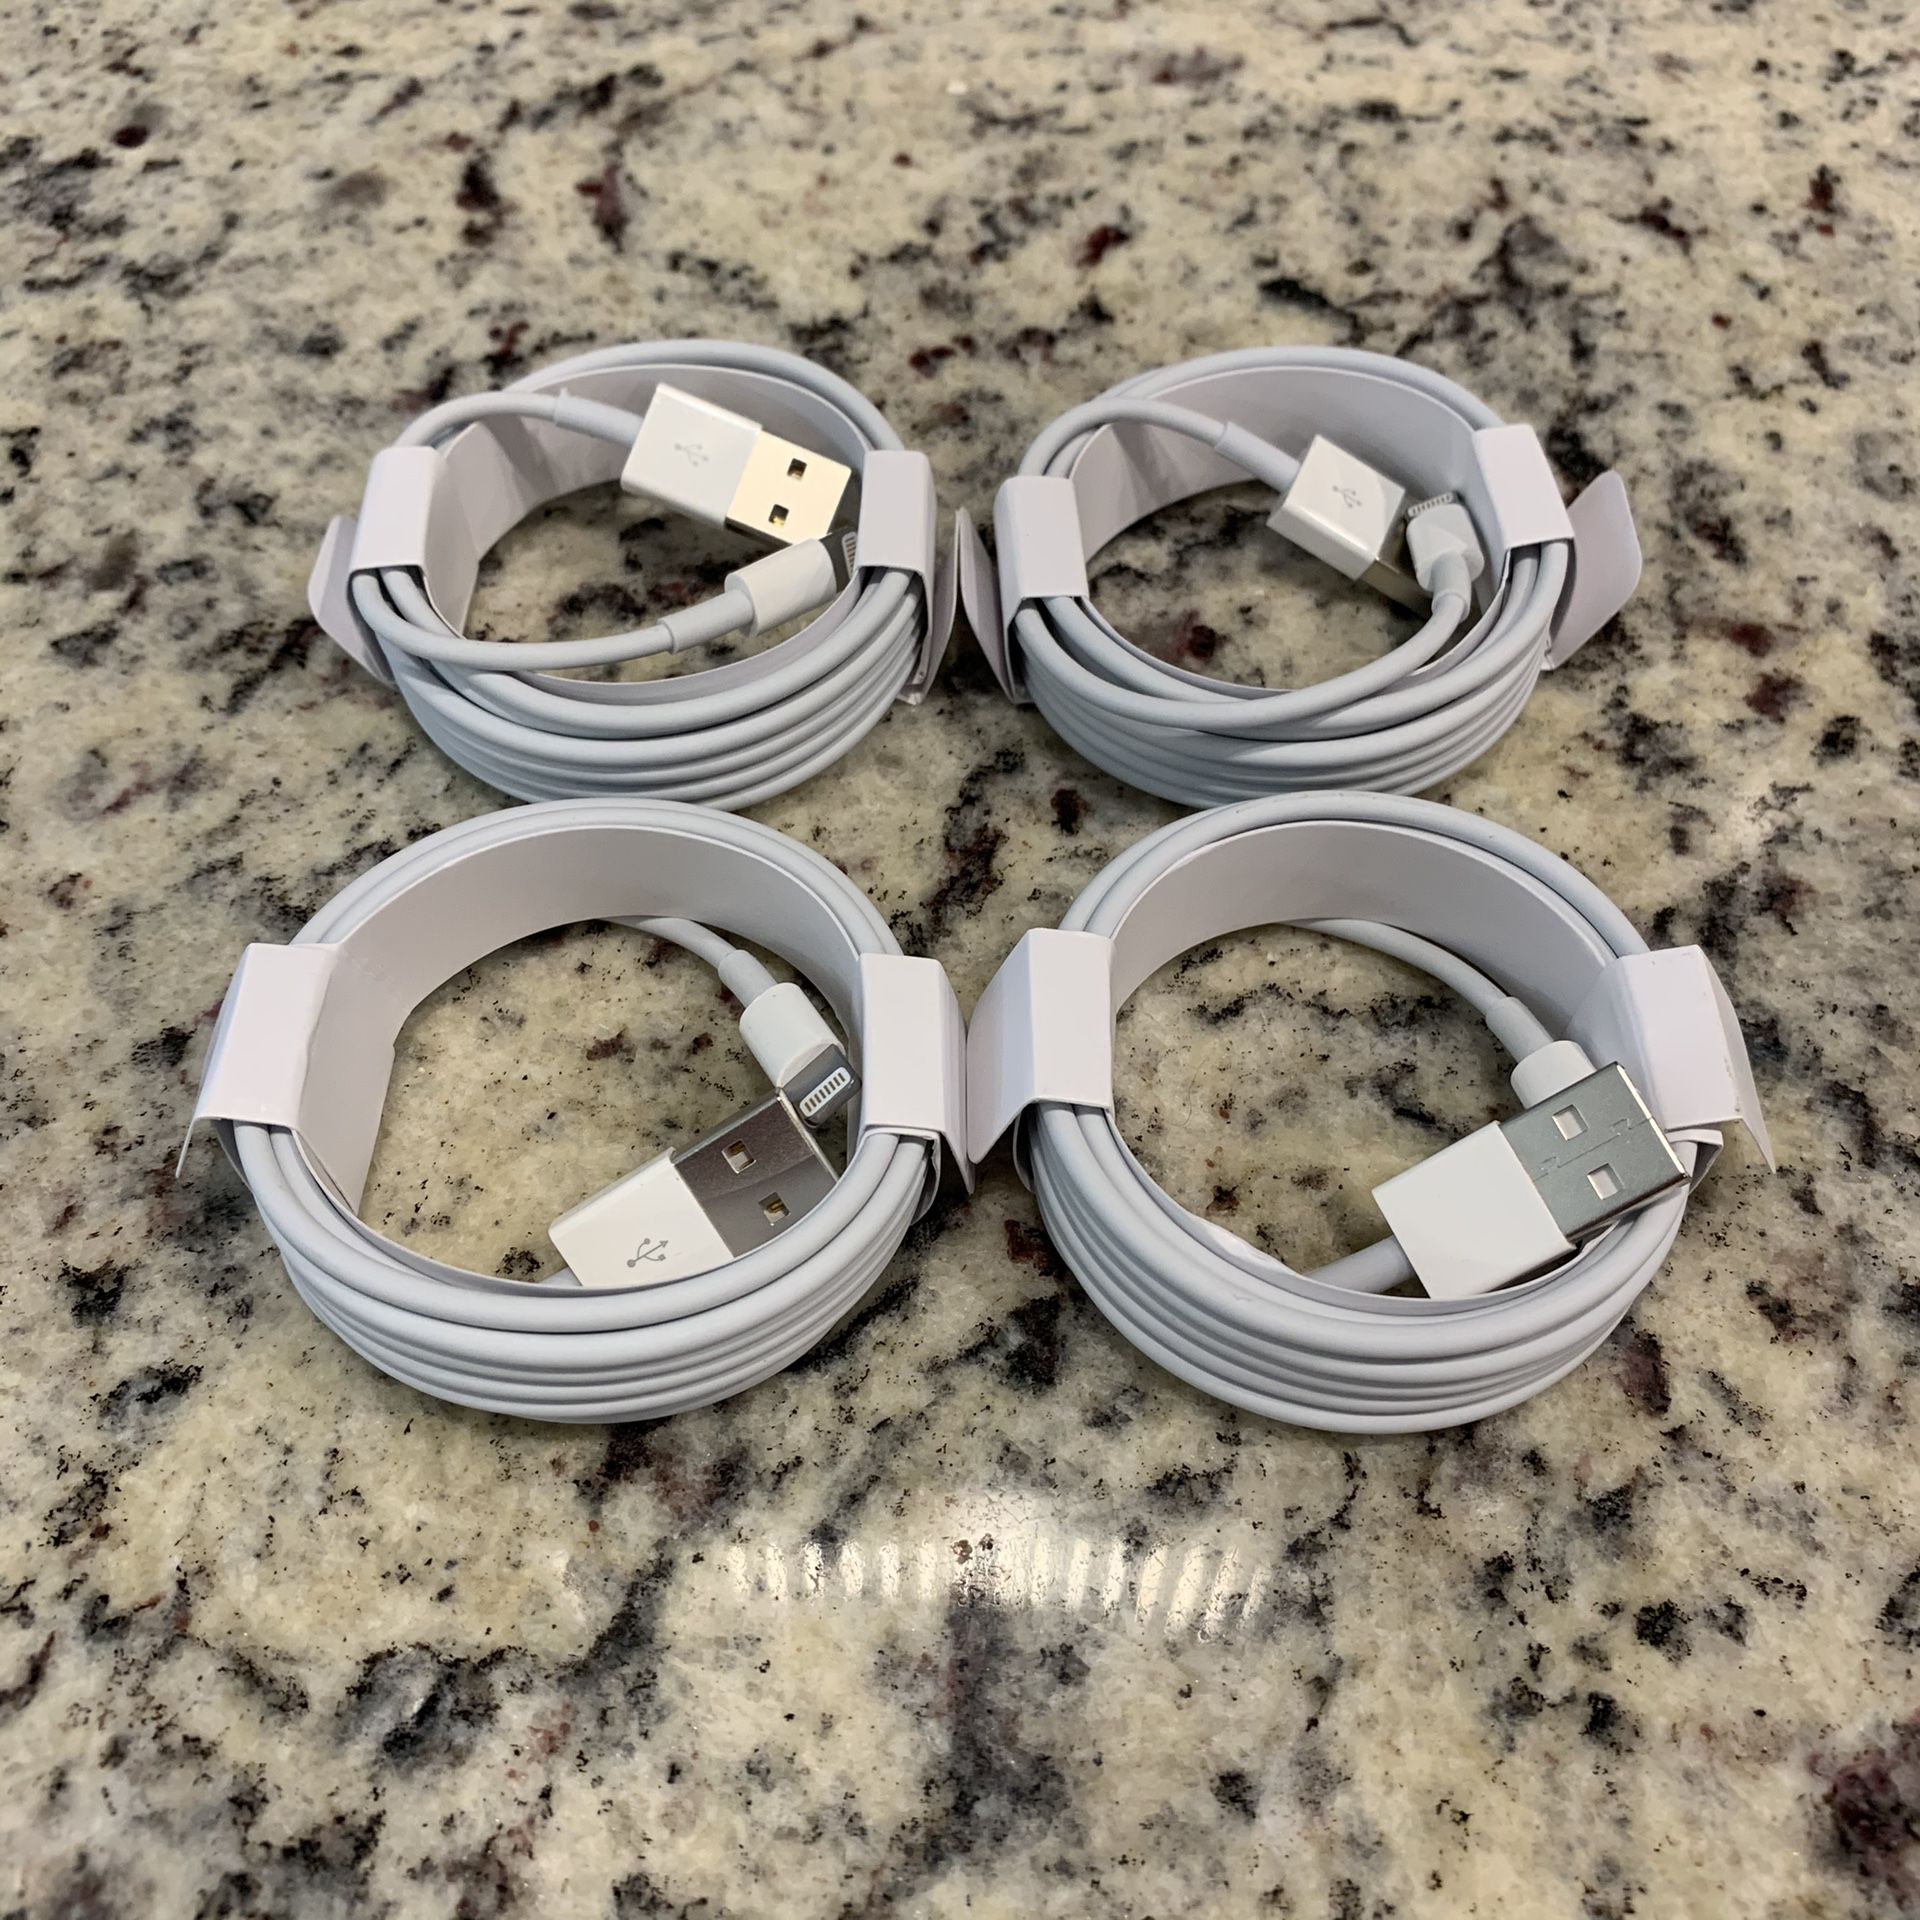 Apple iPhone lightning charging cable 4X